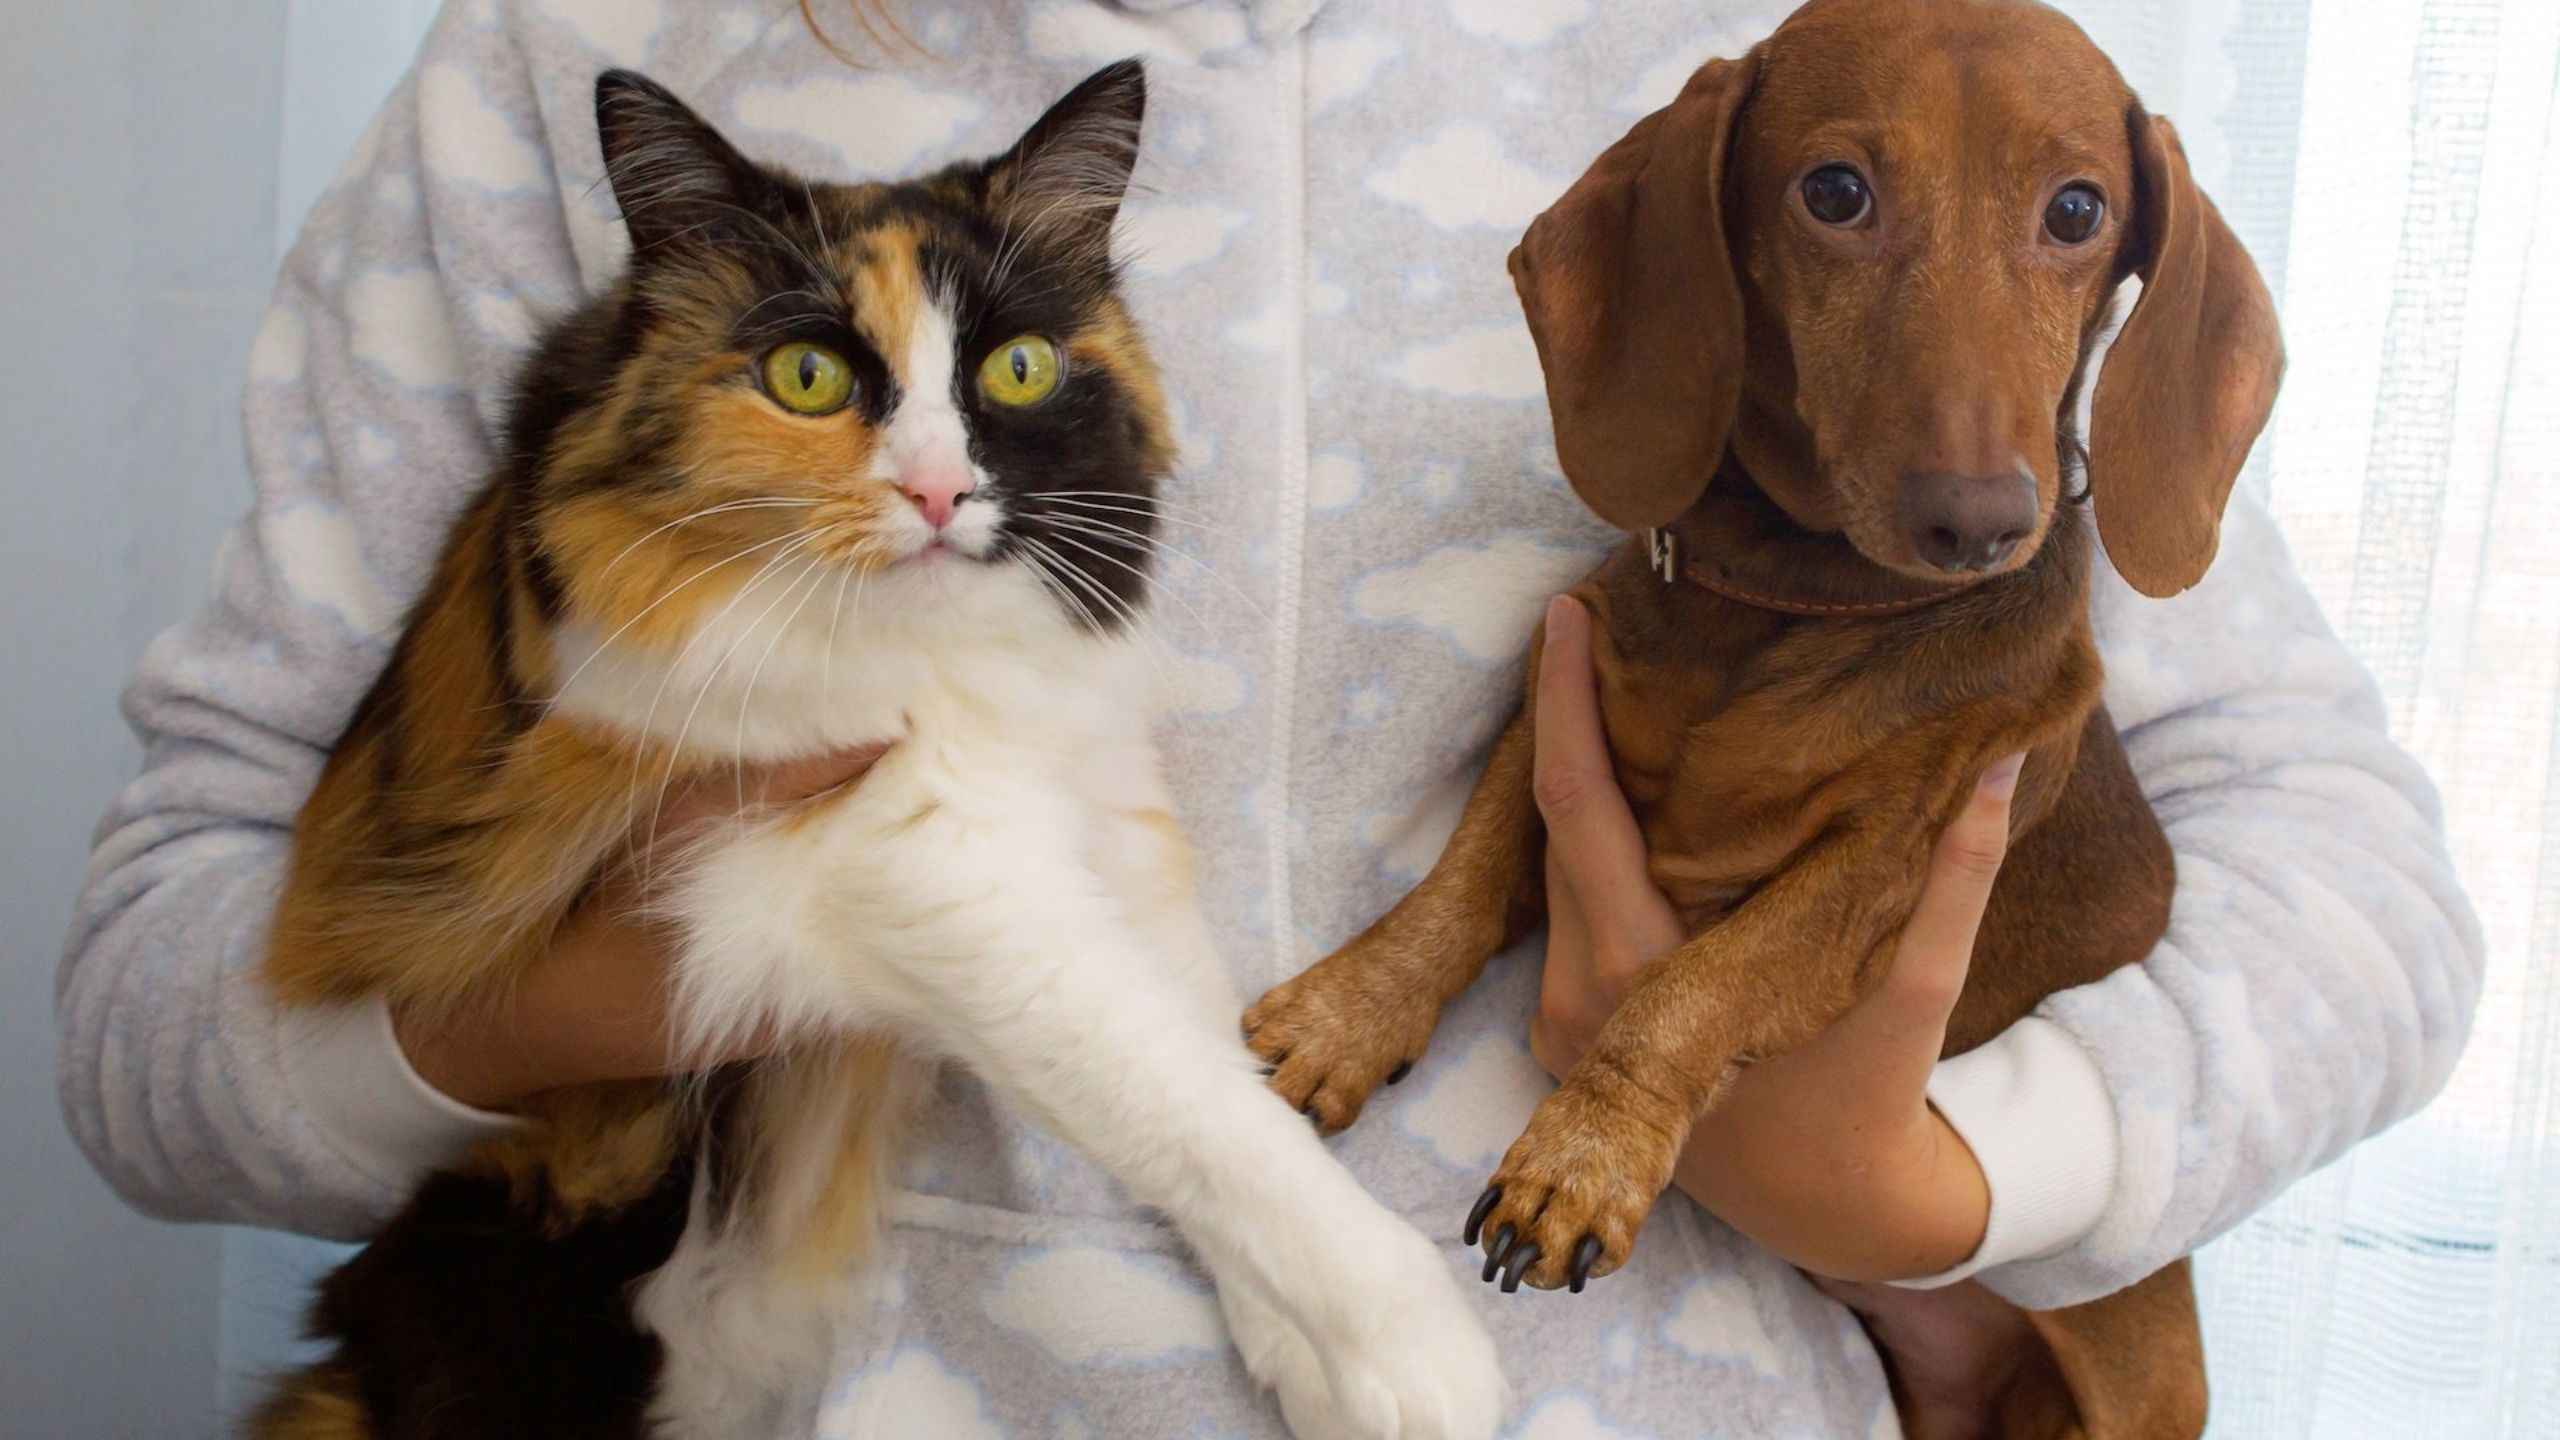 How to Make a Dog and Cat Become Friends